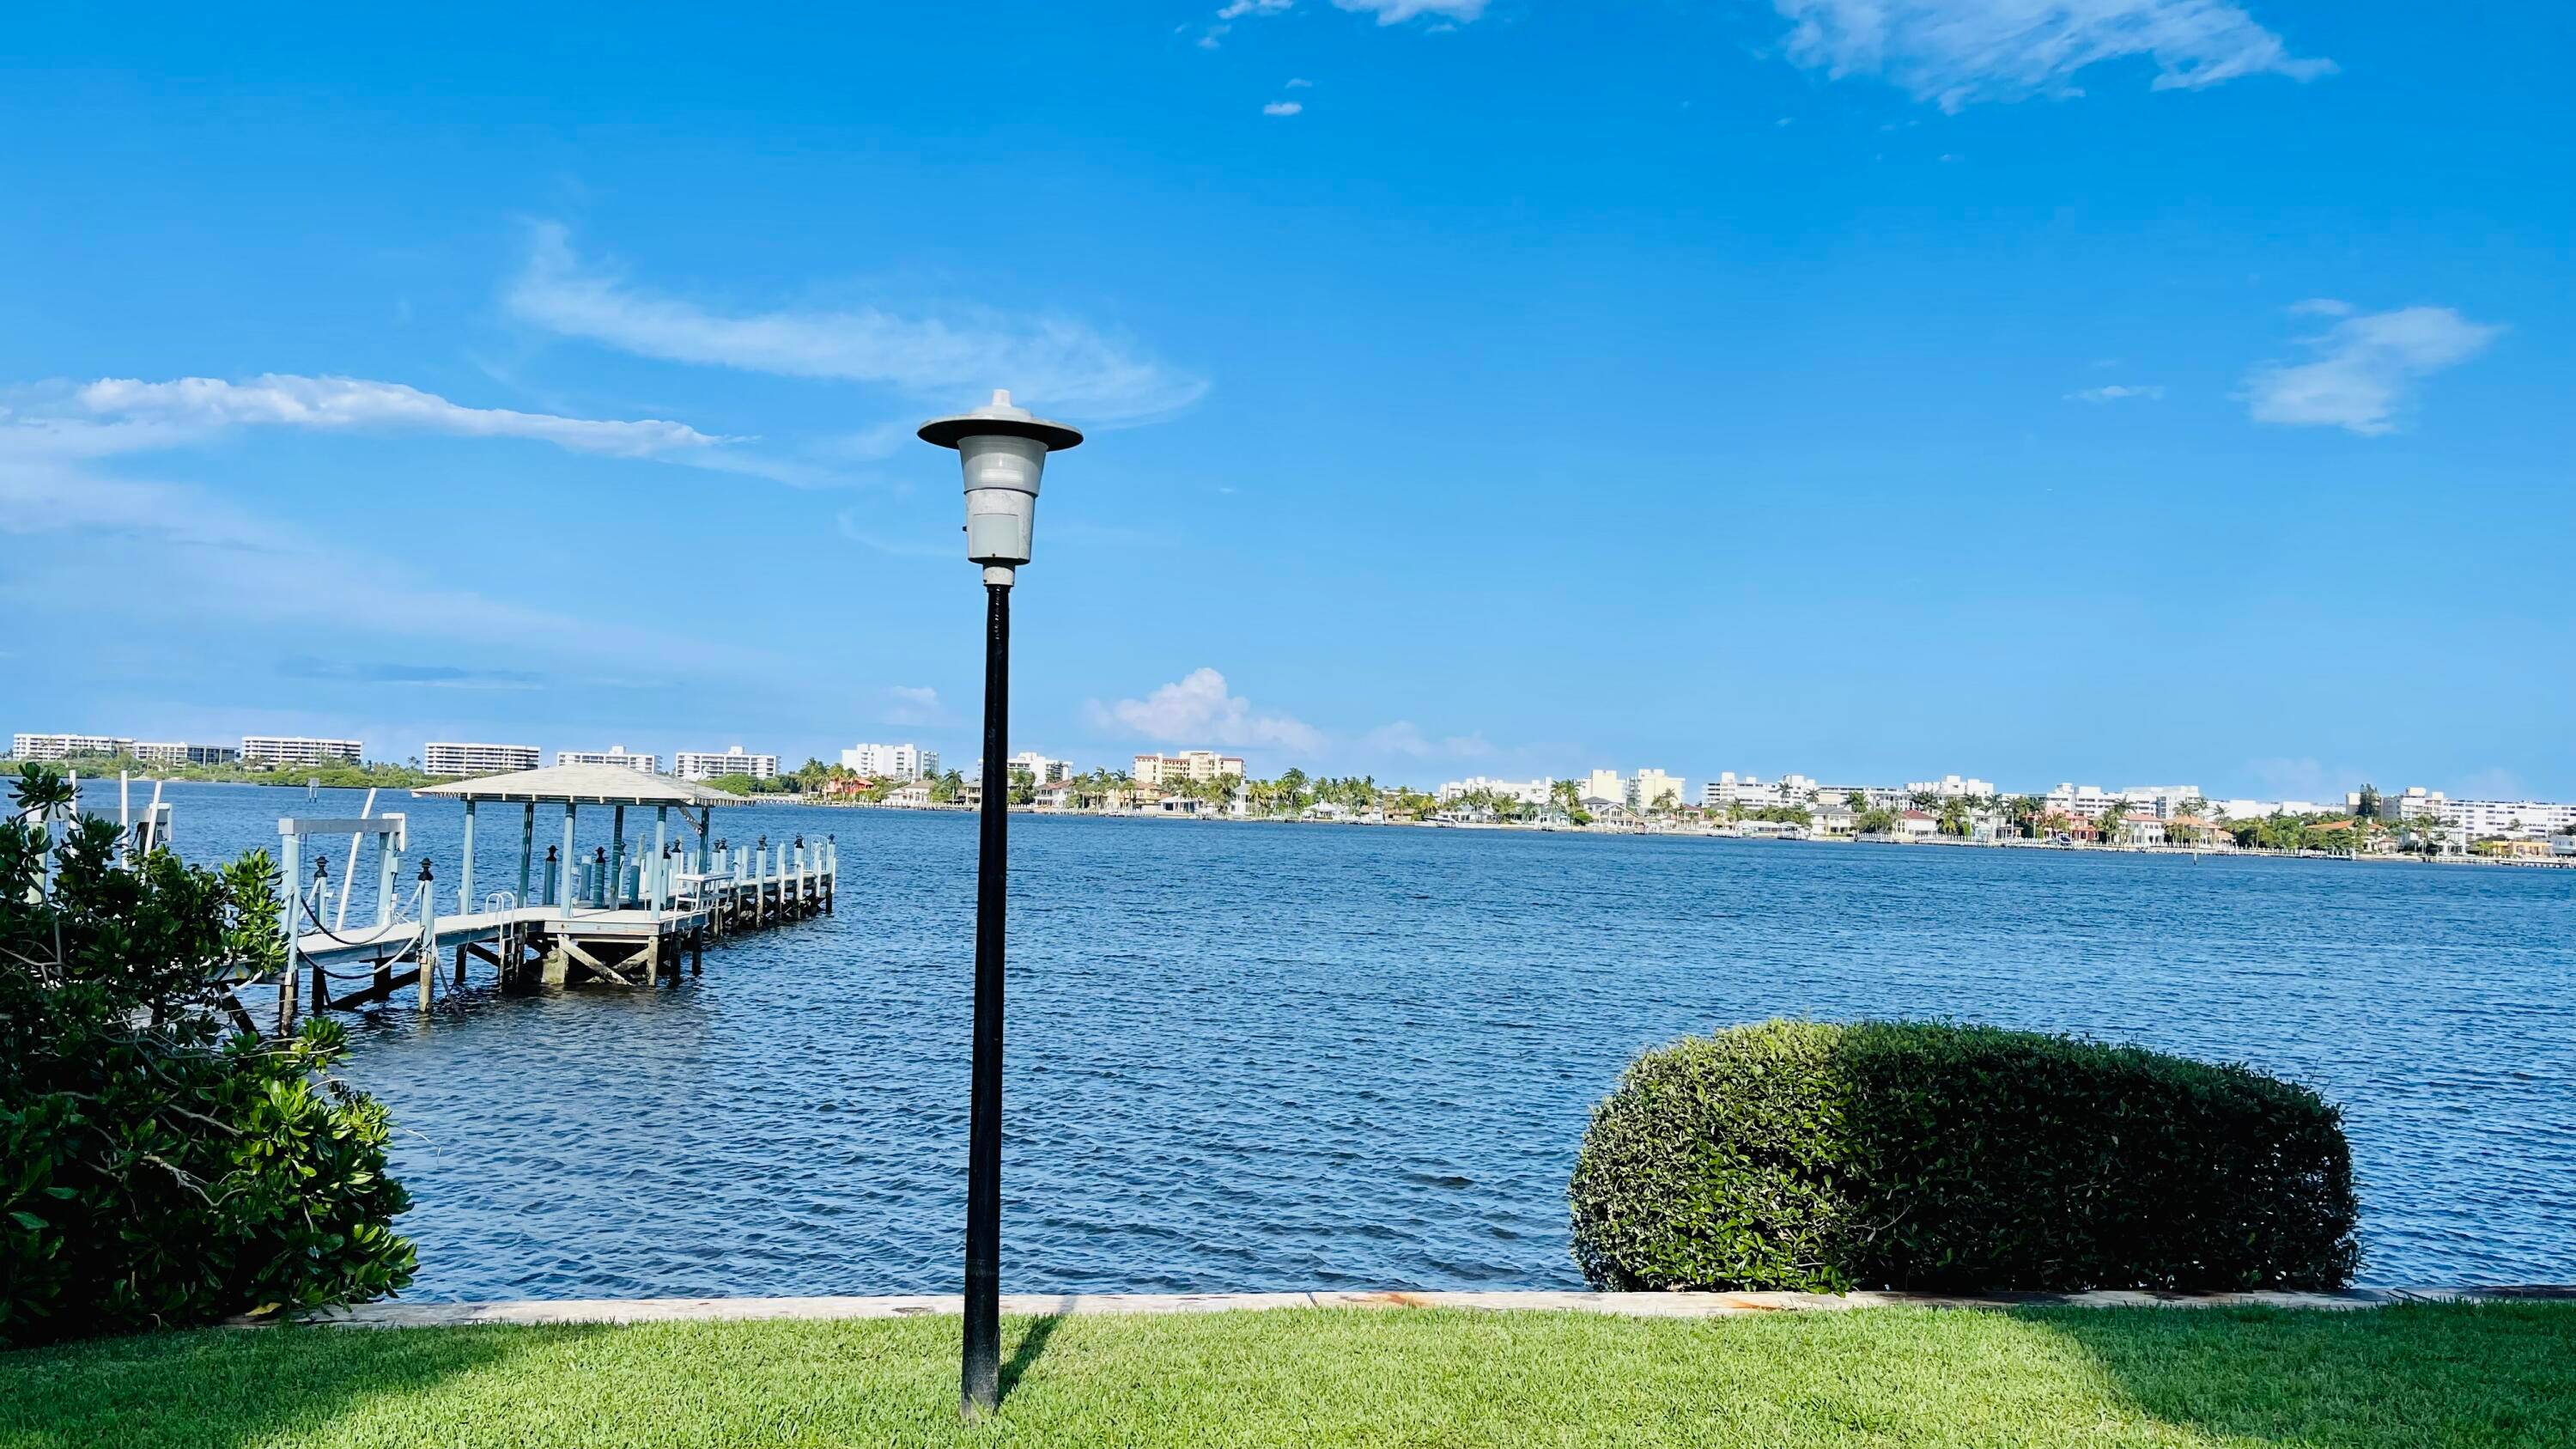 Renovated and Fully Furnished 2 Bedroom, 2 Bathroom Condo in Hidden Harbour of the Palm Beaches.